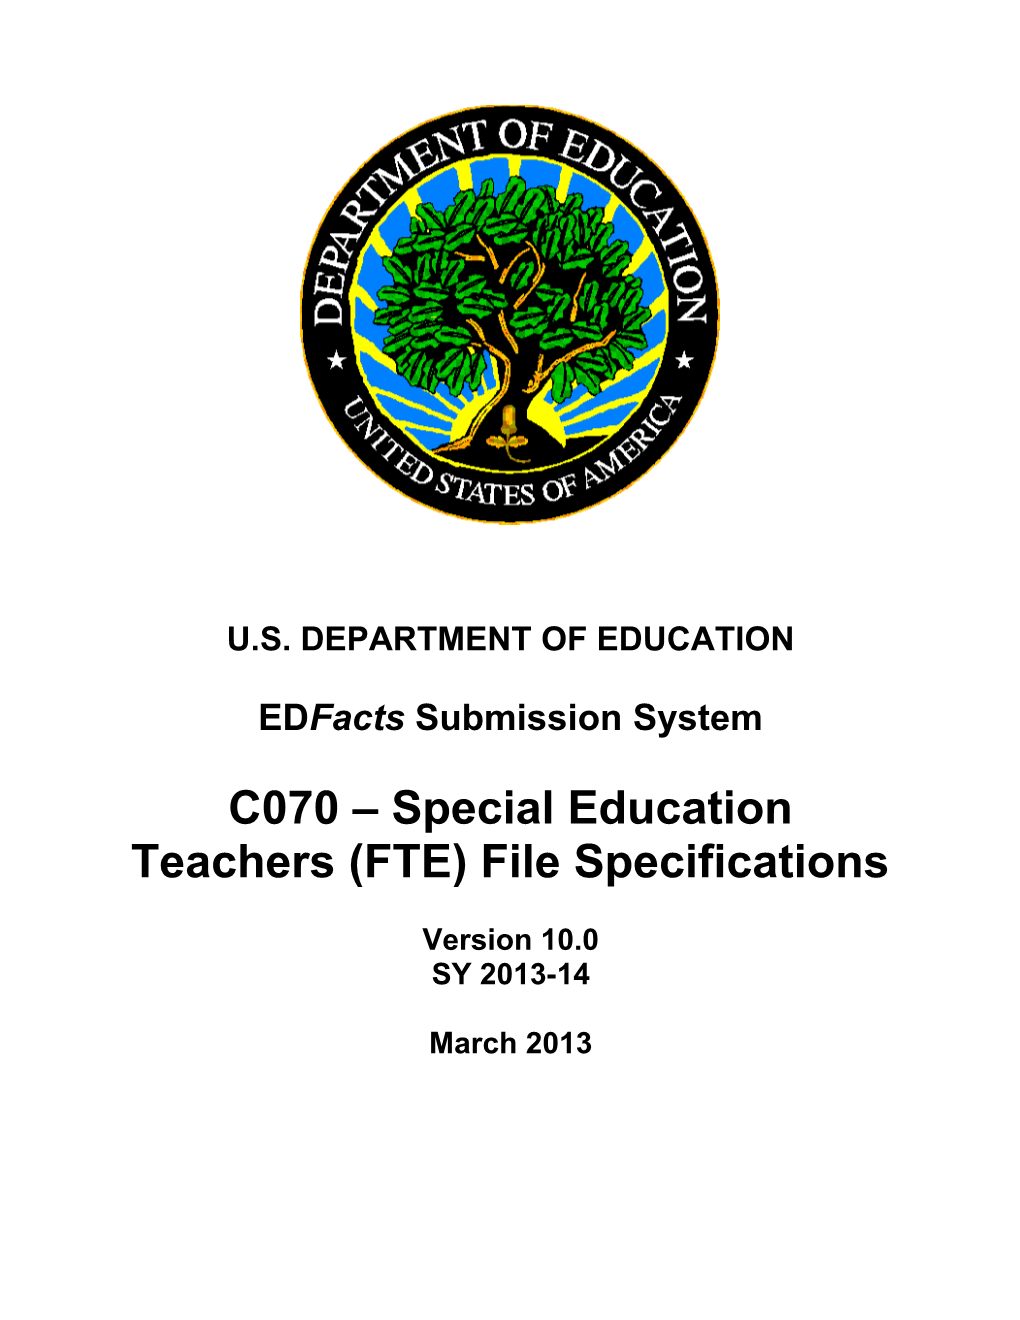 Special Education Teachers (FTE) File Specifications